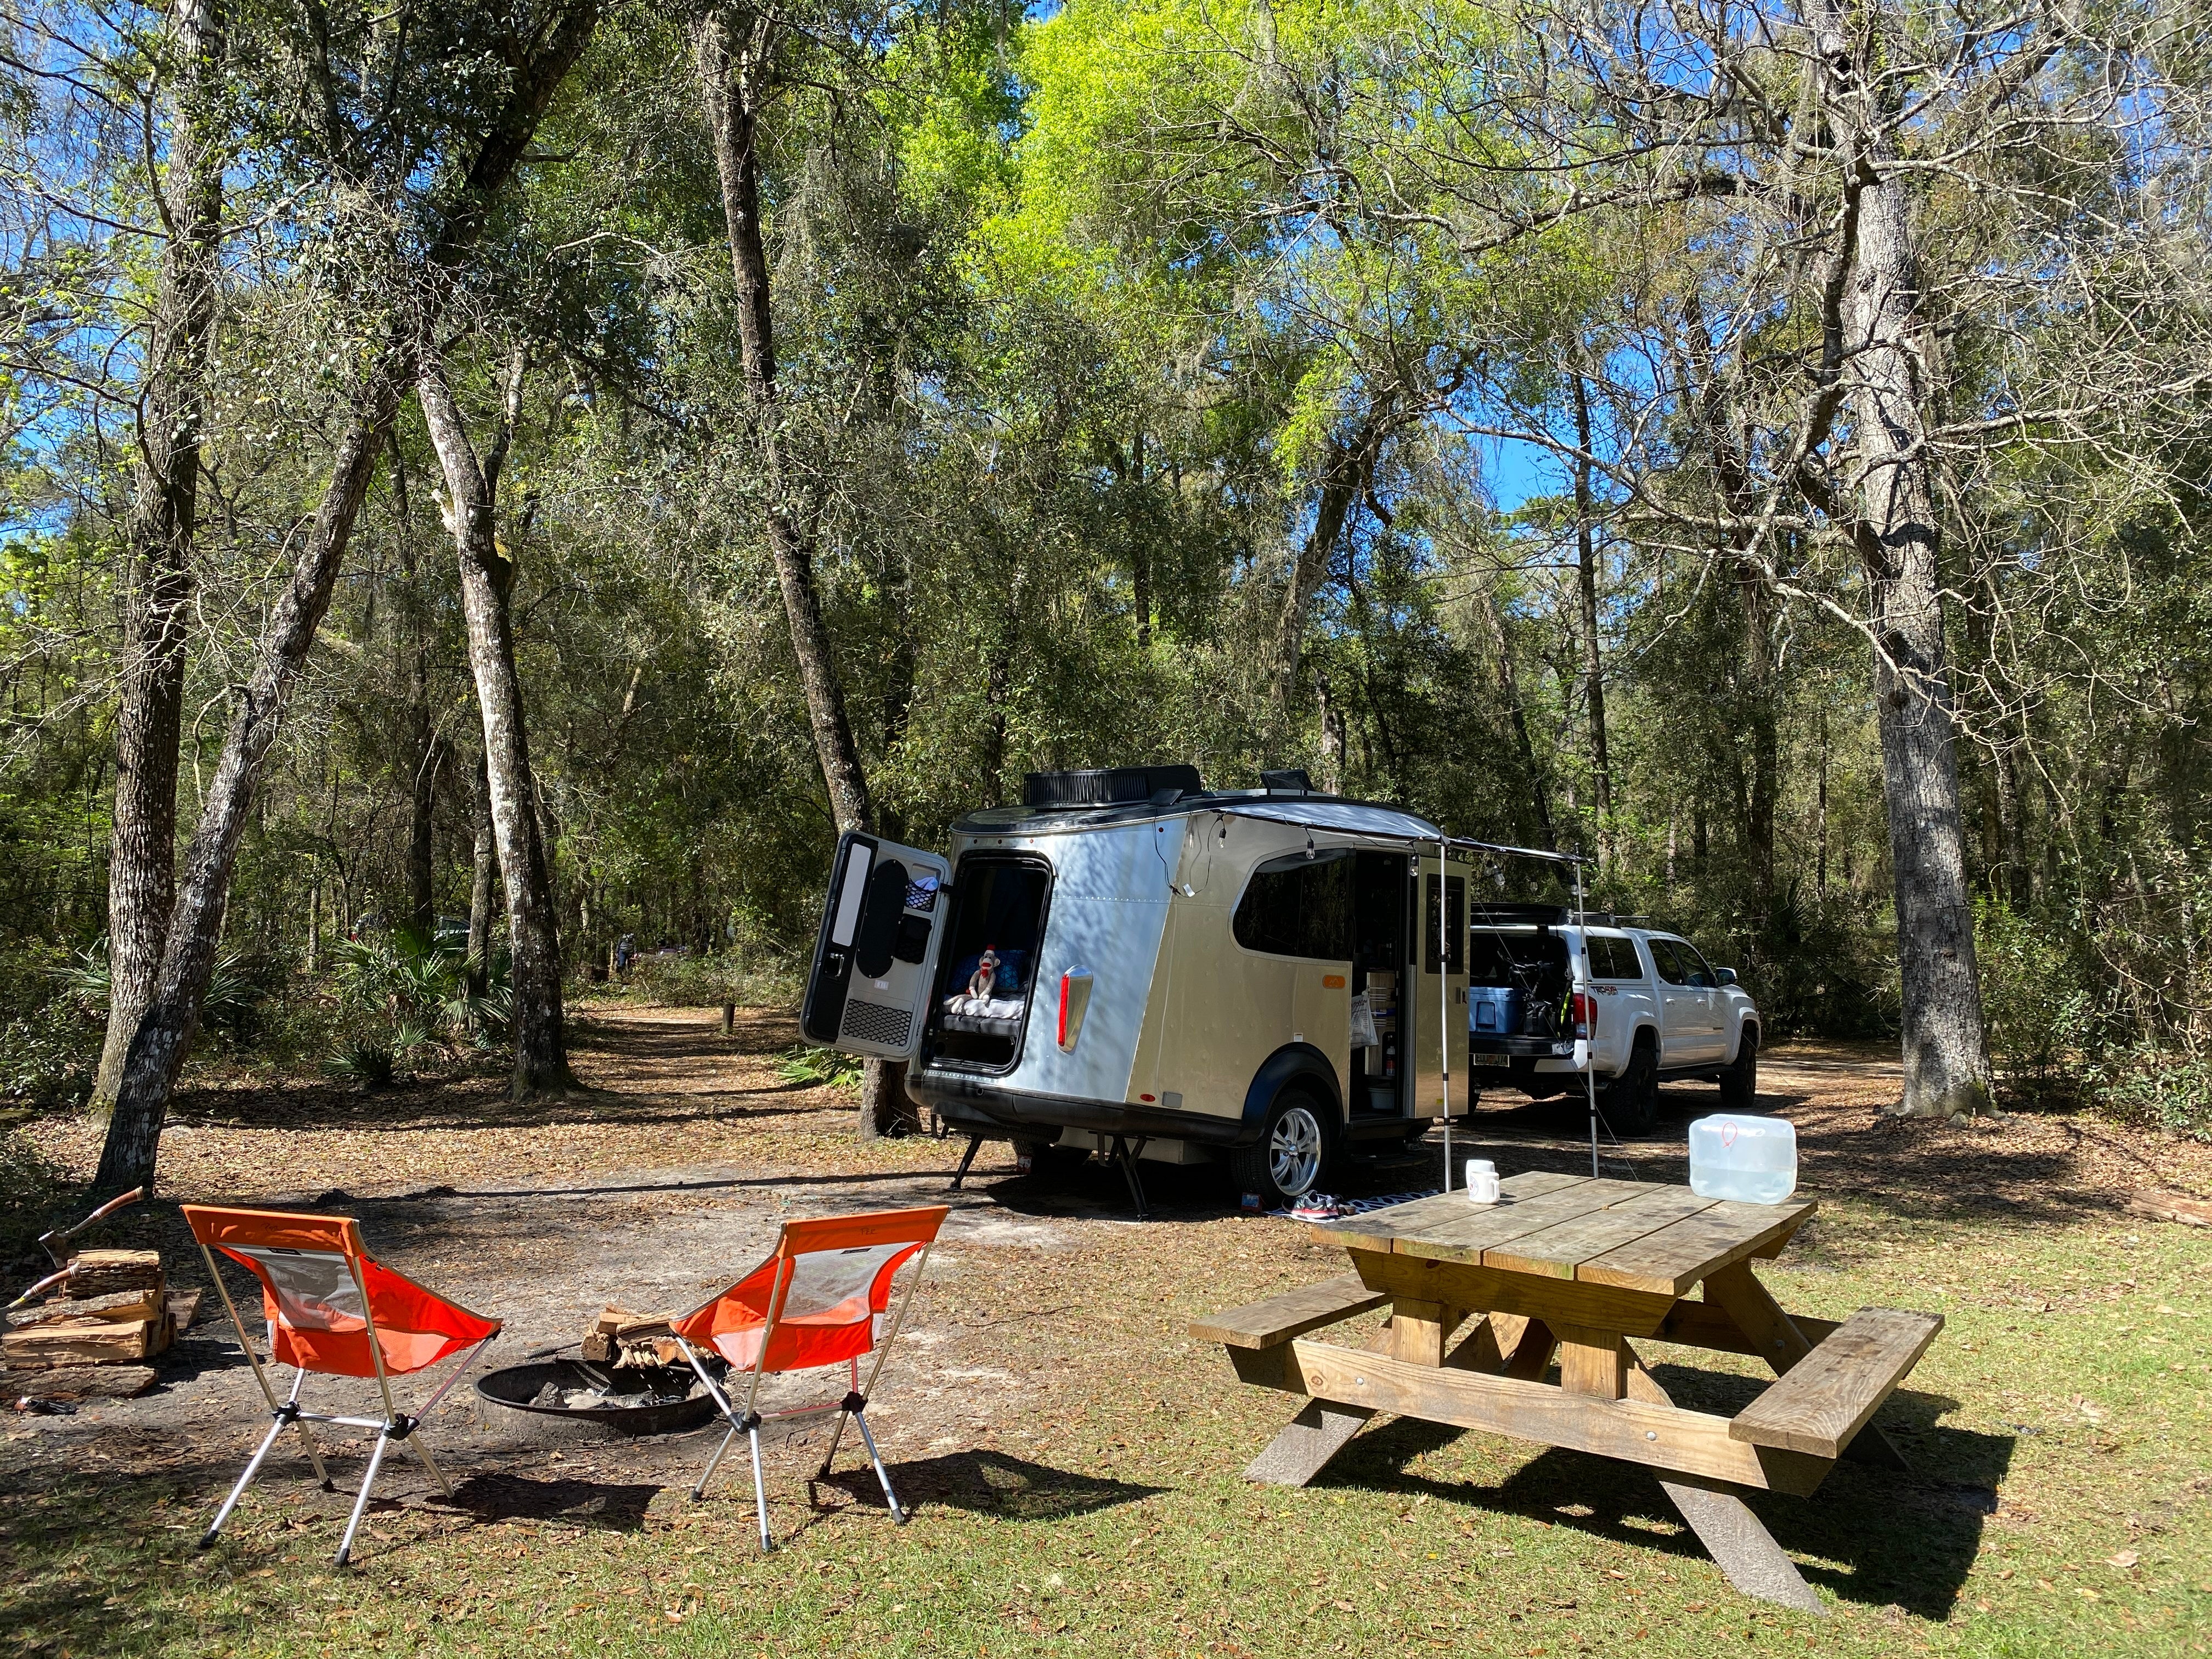 One of our very favorite campsites in all Florida